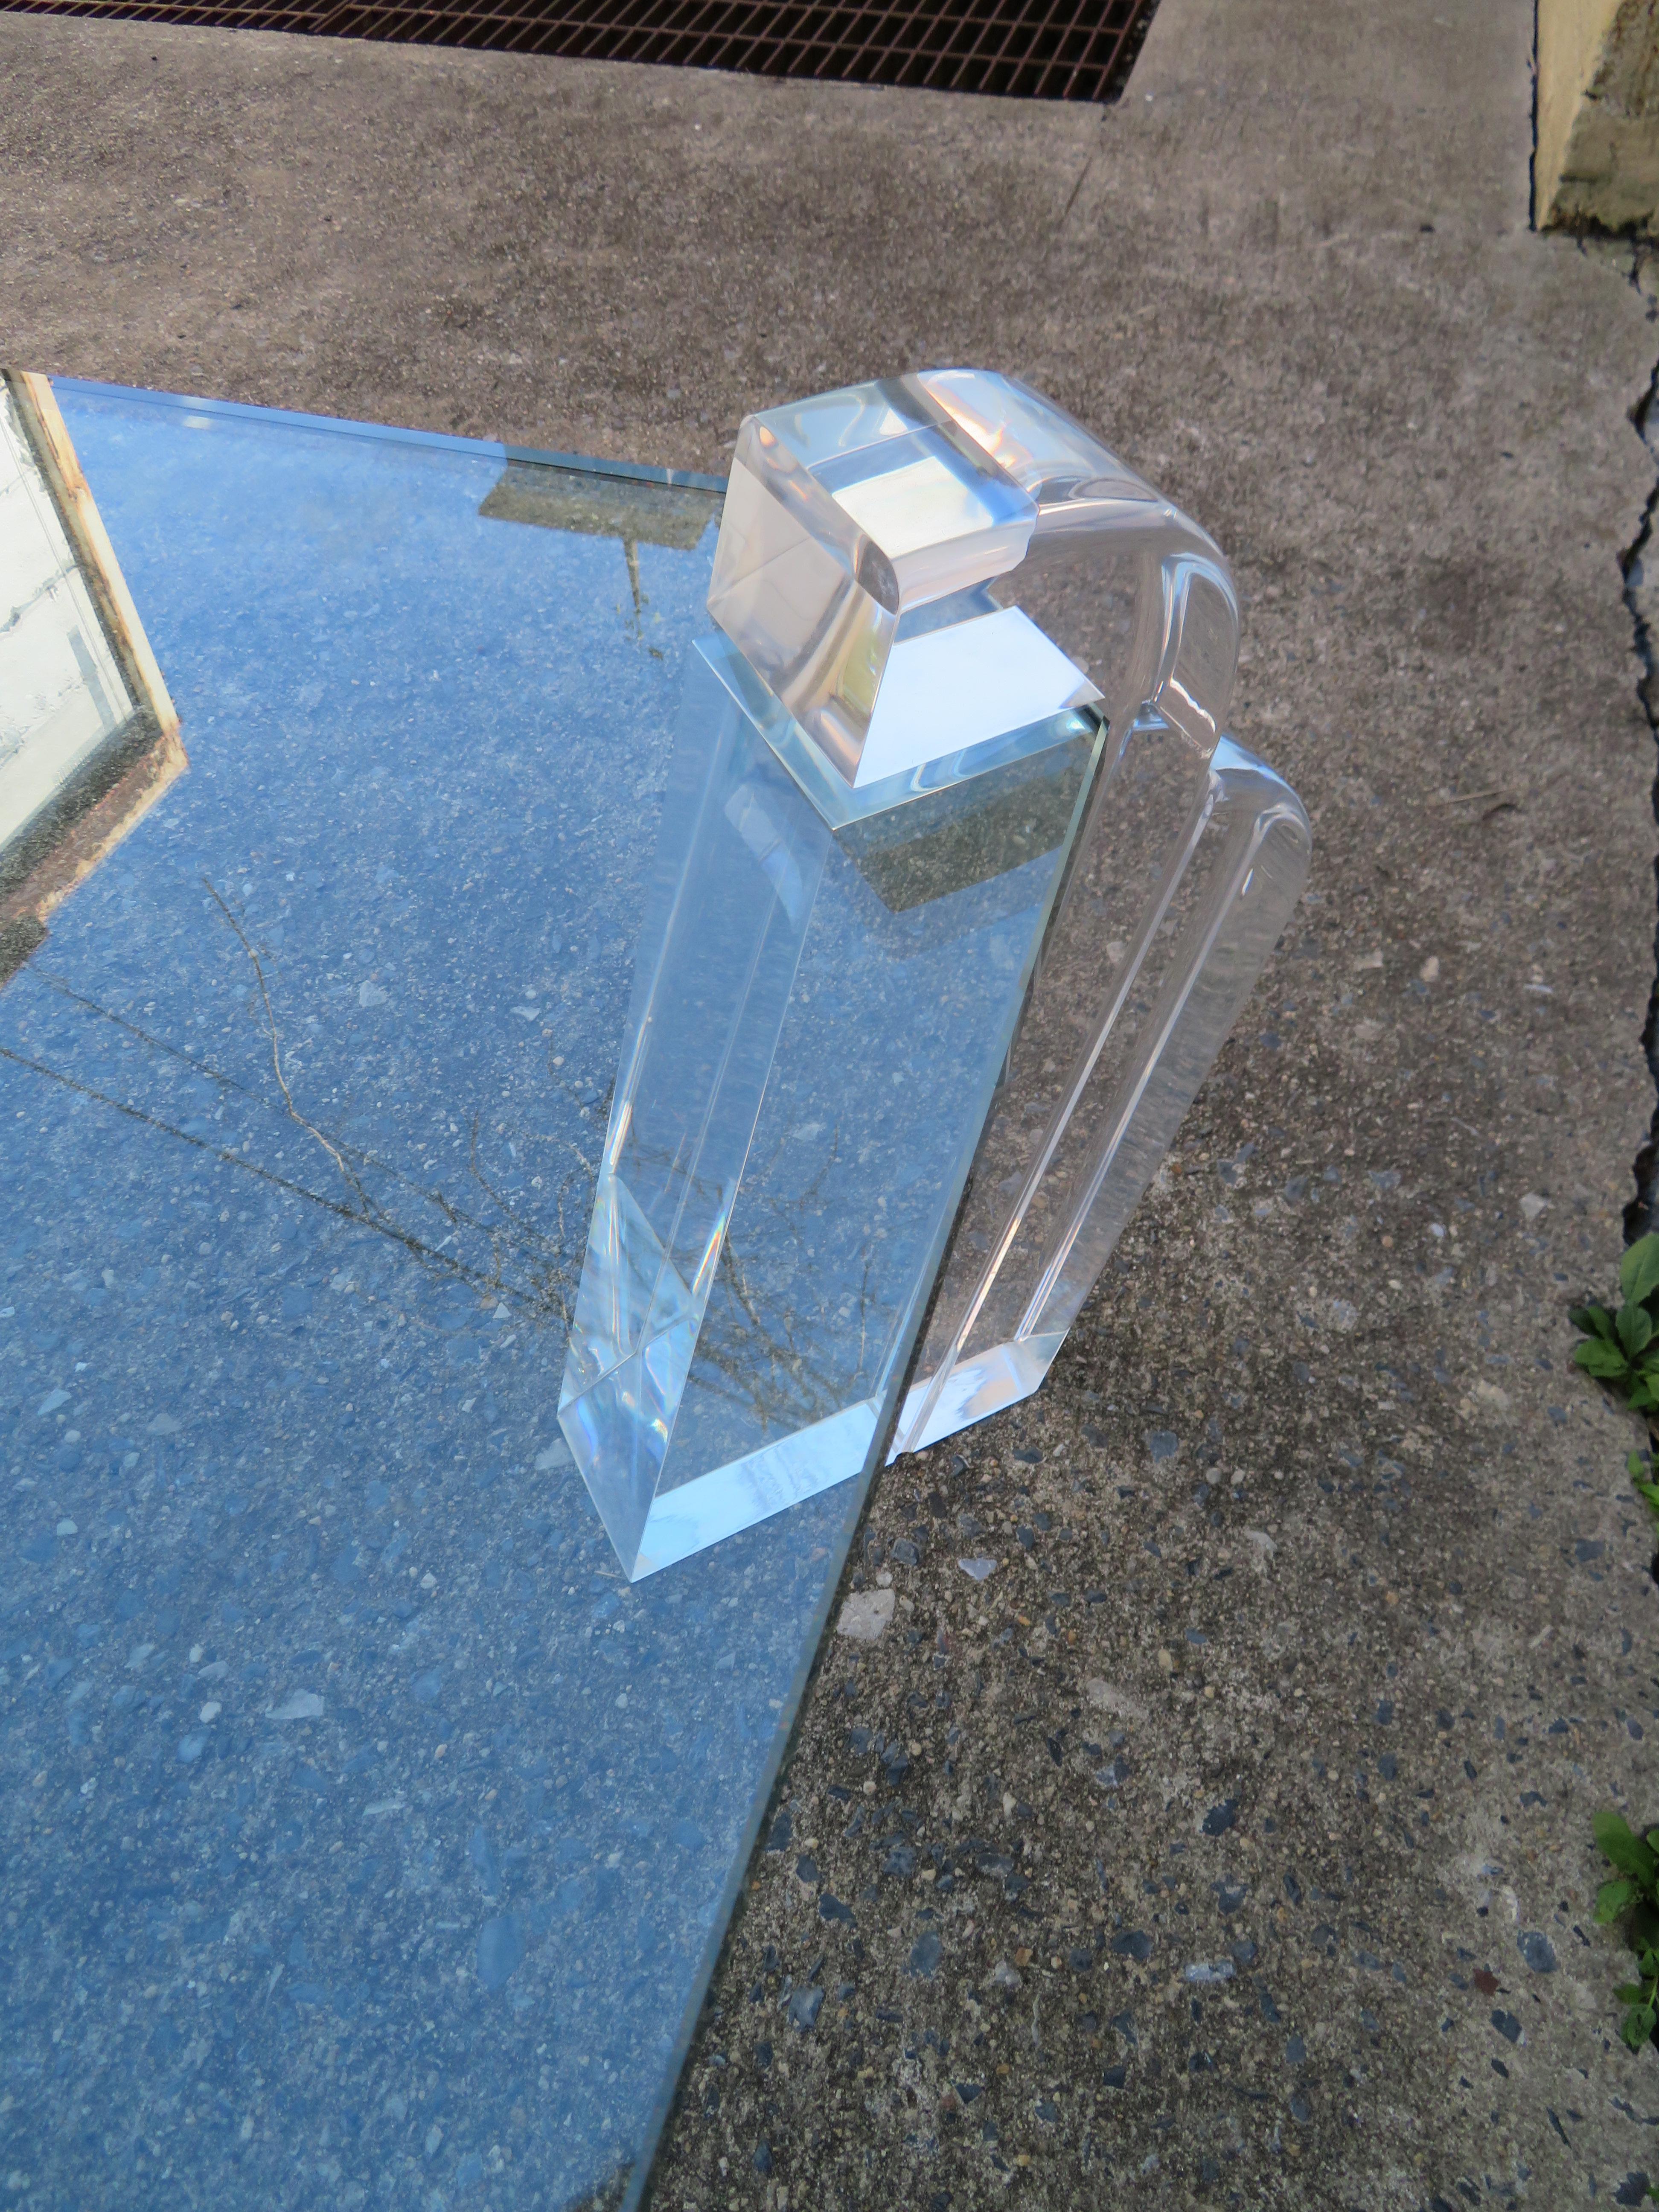 Gorgeous Karl Springer Style Lucite Pillar Coffee Table, Mid-Century Modern In Good Condition For Sale In Pemberton, NJ